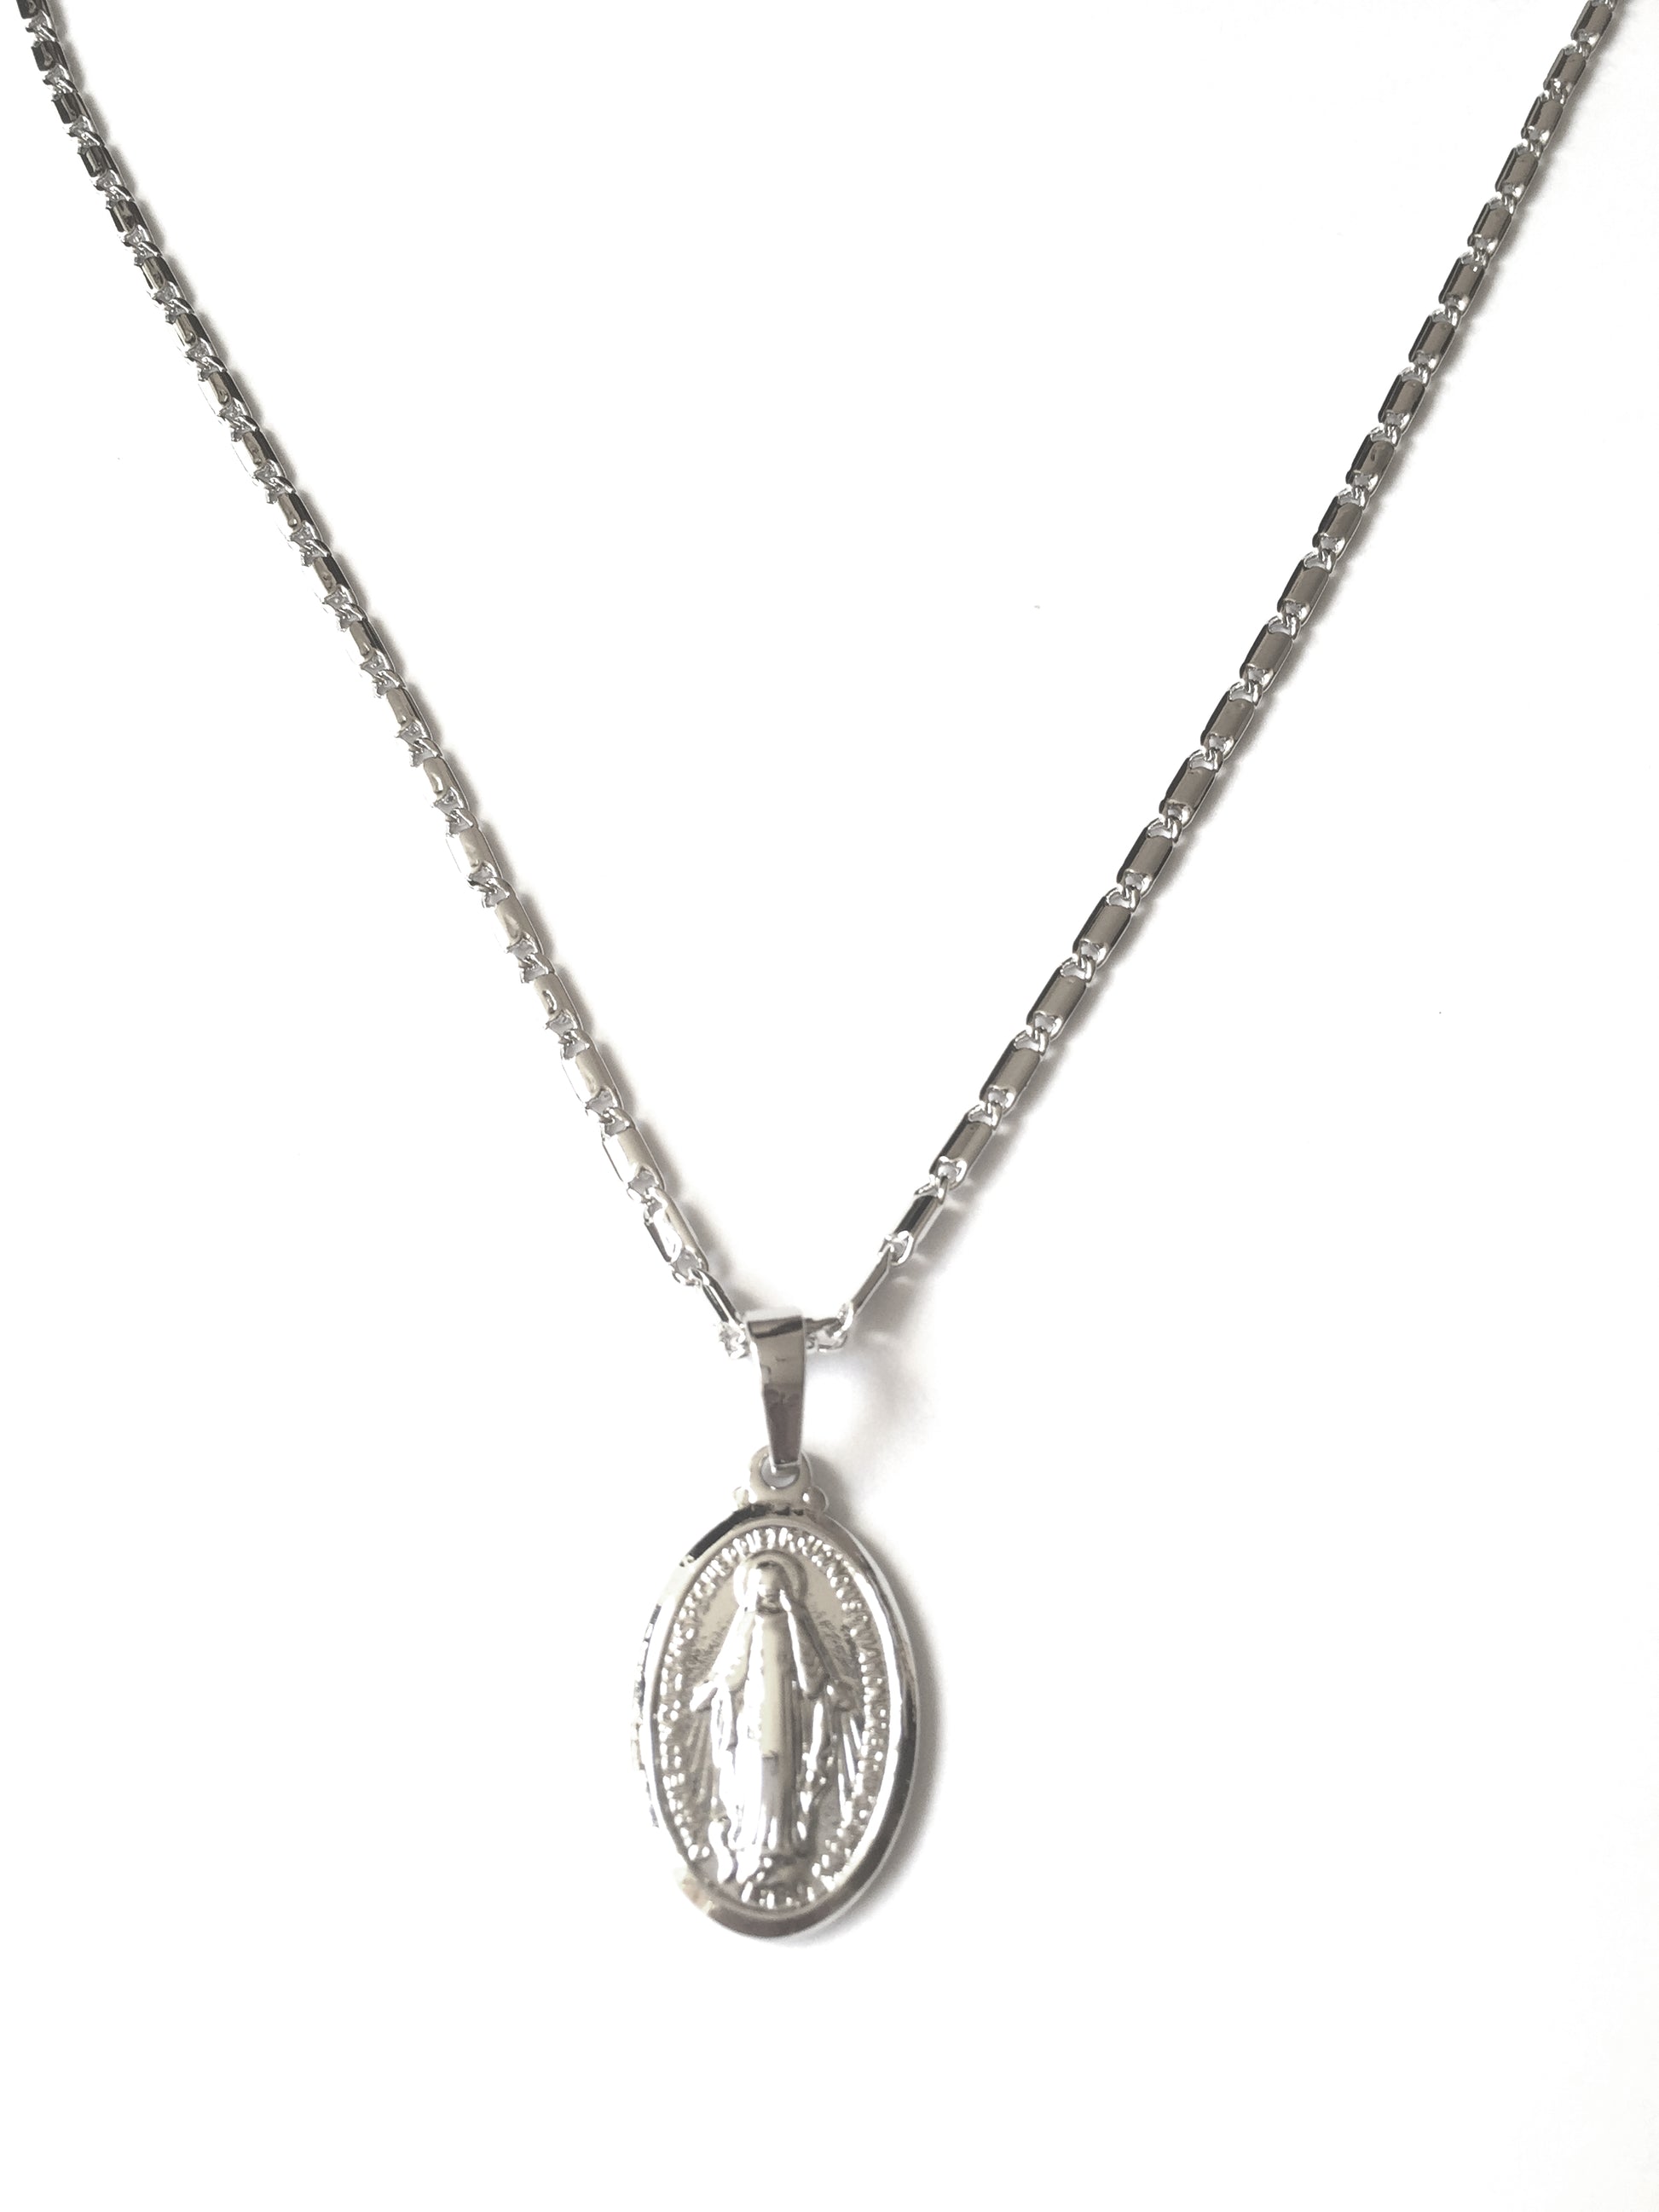 Silver Miraculous Medal Necklace, A high quality, beautiful, holy miraculous medal necklace with an adjustable link chain and pendant with the Immaculate Virgin Mary design in a silver tone.  The perfect gift for a Baptism, Christening, Communion, Confirmation, Special Occasion, Christmas or Easter Gift